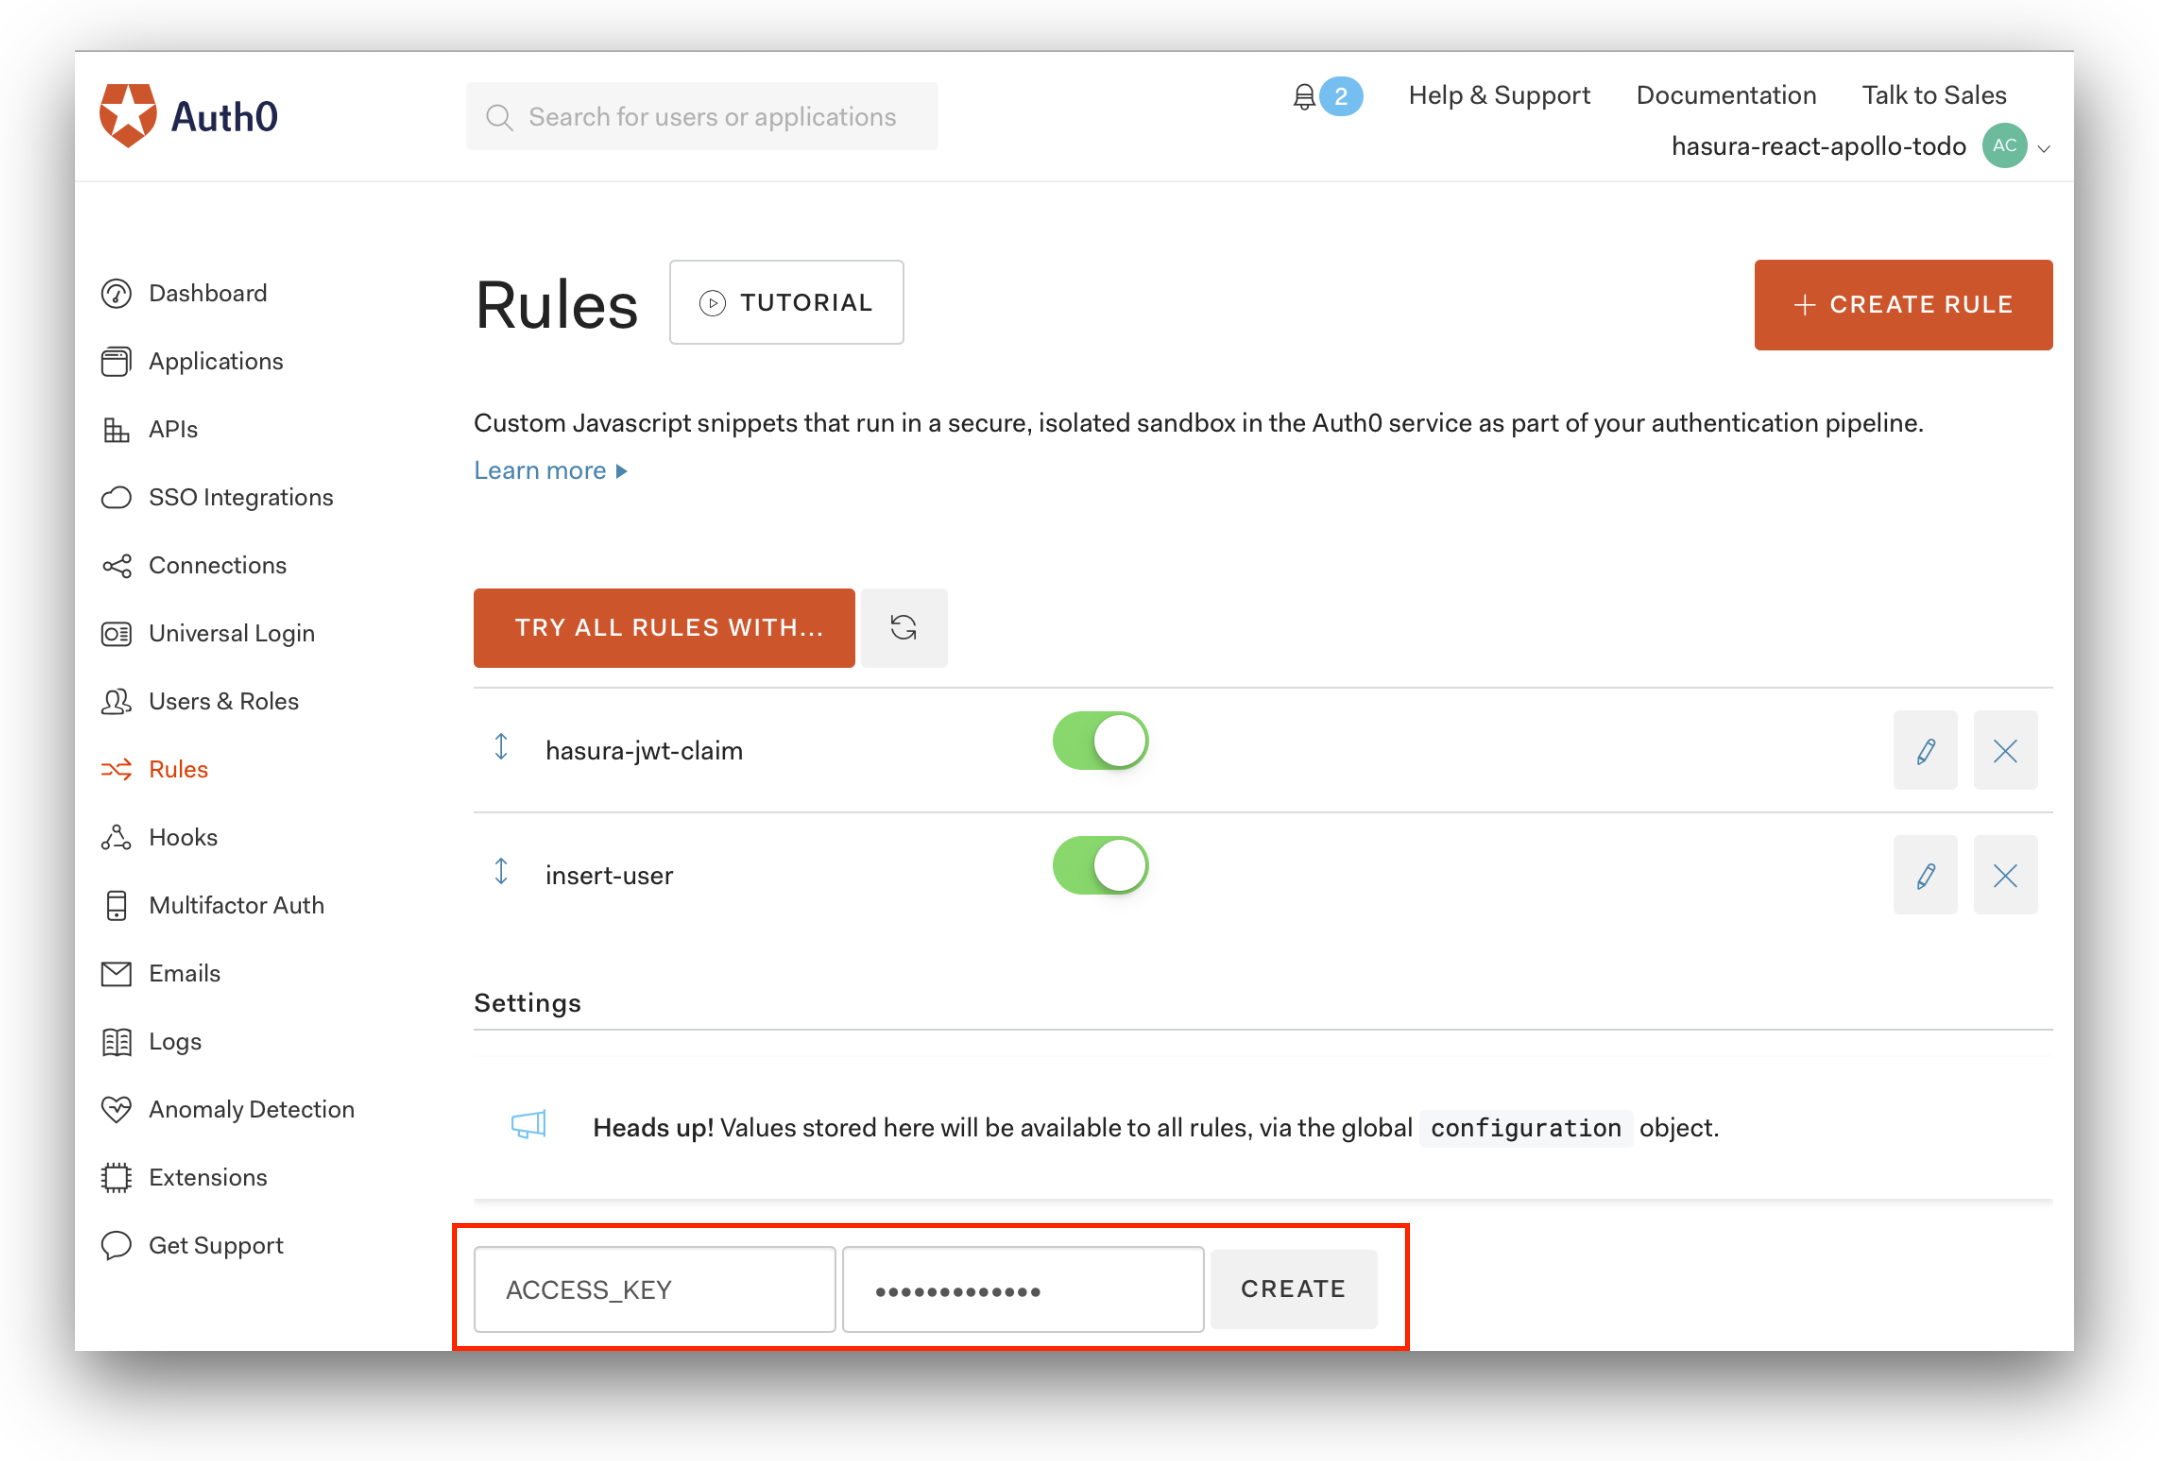 Configuring the Rules Settings in the Auth0 Dashboard